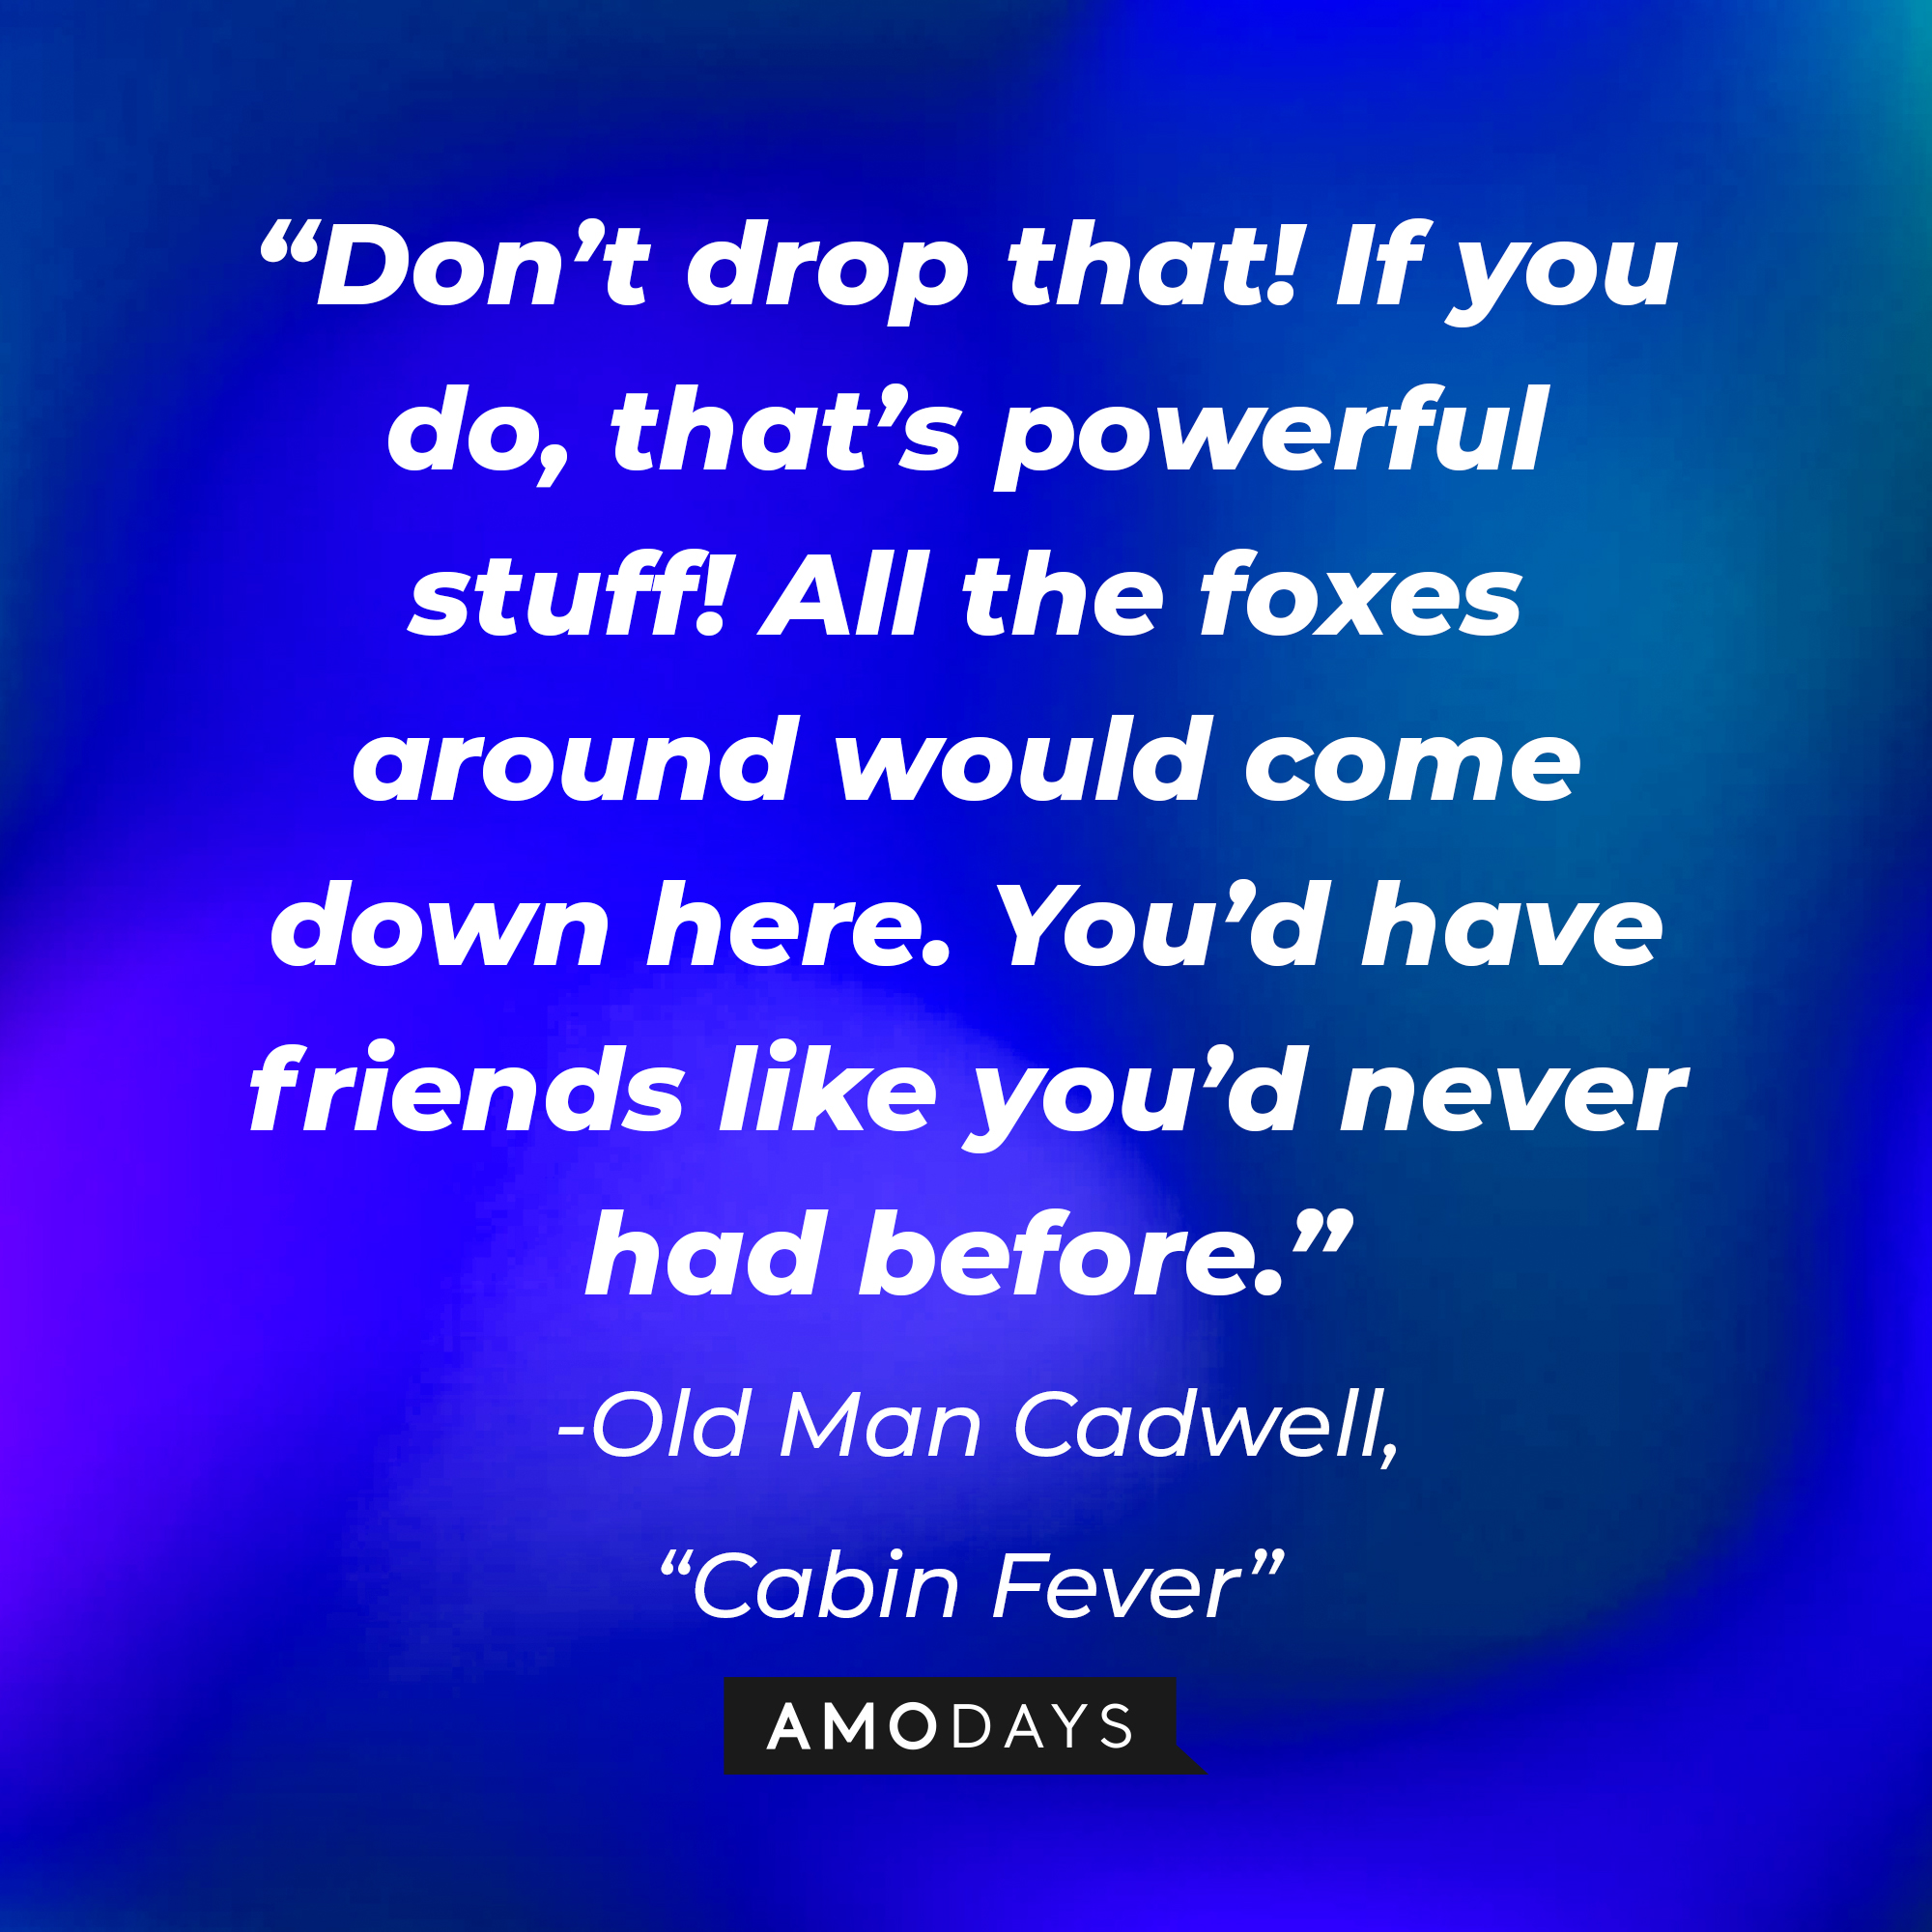 Old Man Cadwell's quote from "Cabin Fever:" “Don’t drop that! If you do, that’s powerful stuff! All the foxes around would come down here. You’d have friends like you’d never had before.” | Source: AmoDays